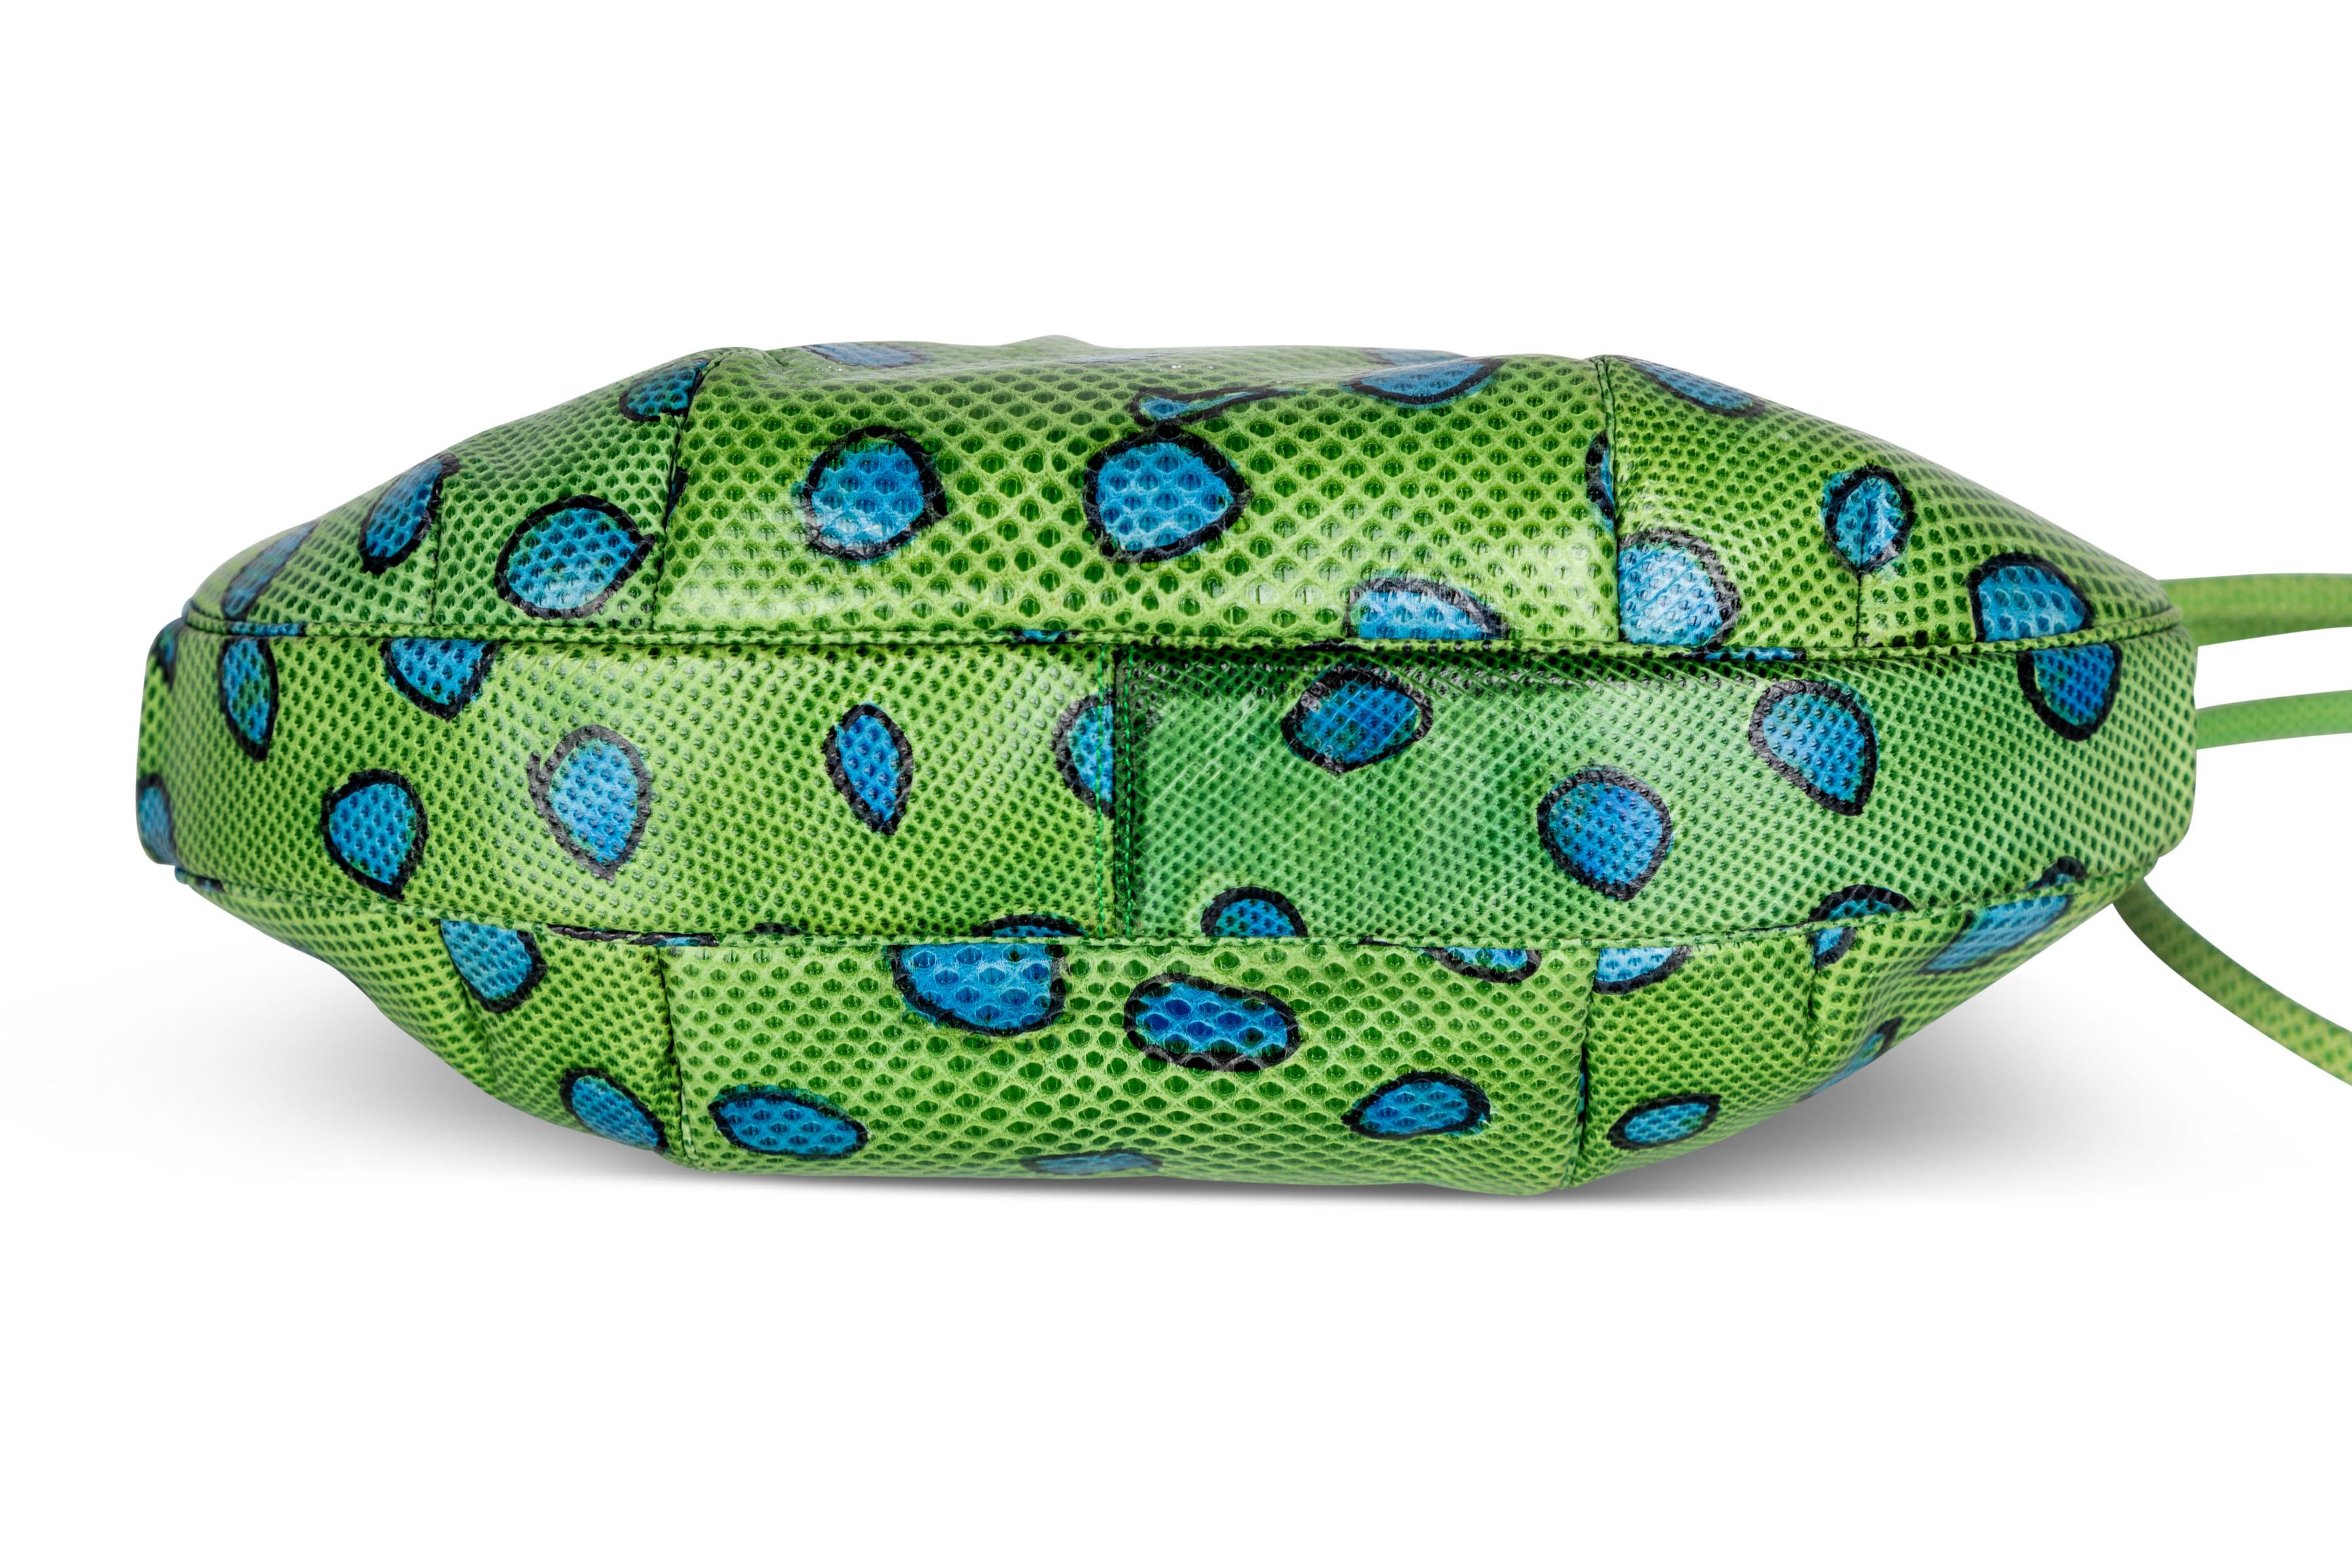 Men's Judith Leiber Green and Blue Reptile Leather Clutch Bag, 1986